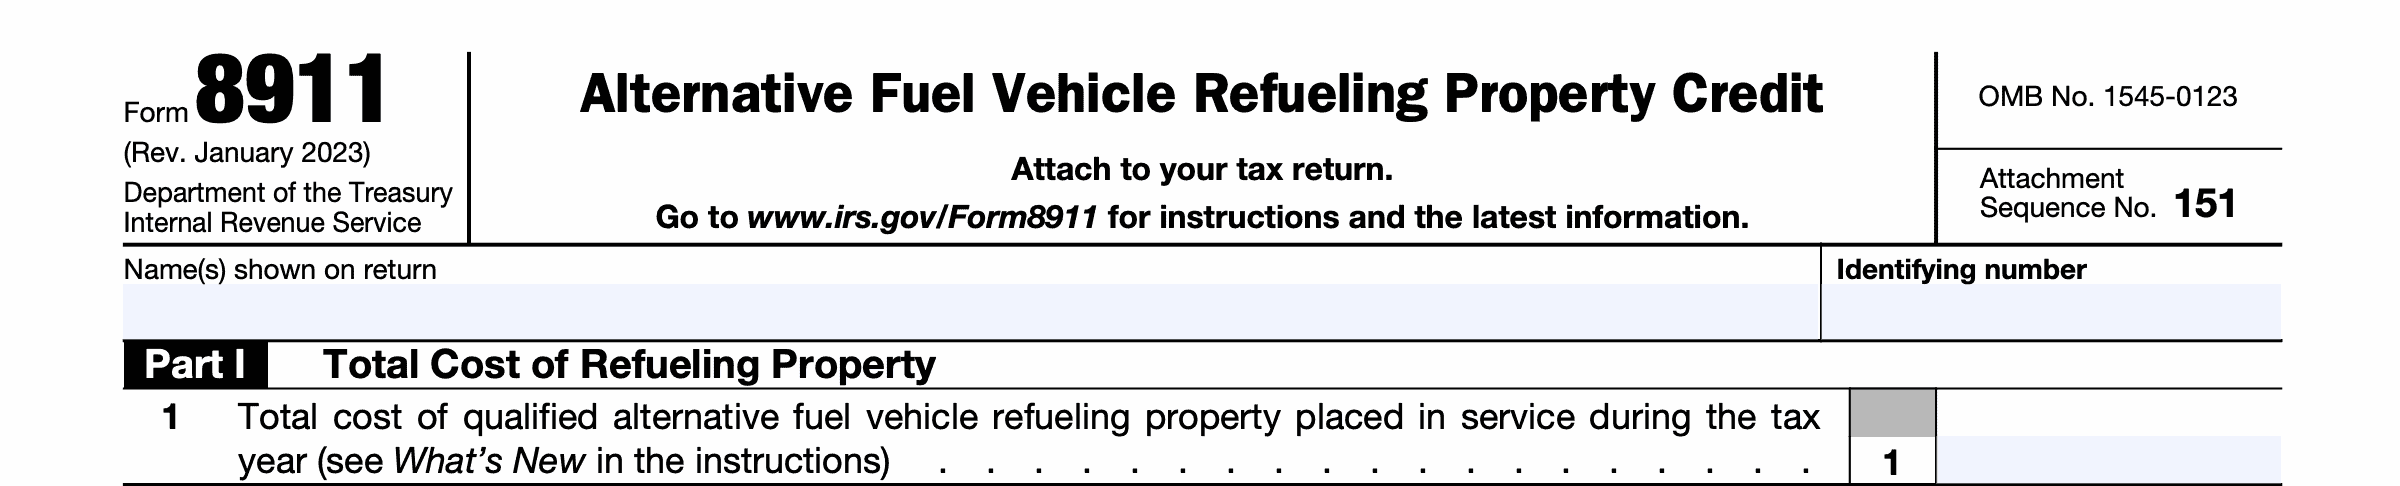 Form 8911, part I: Total cost of refueling property